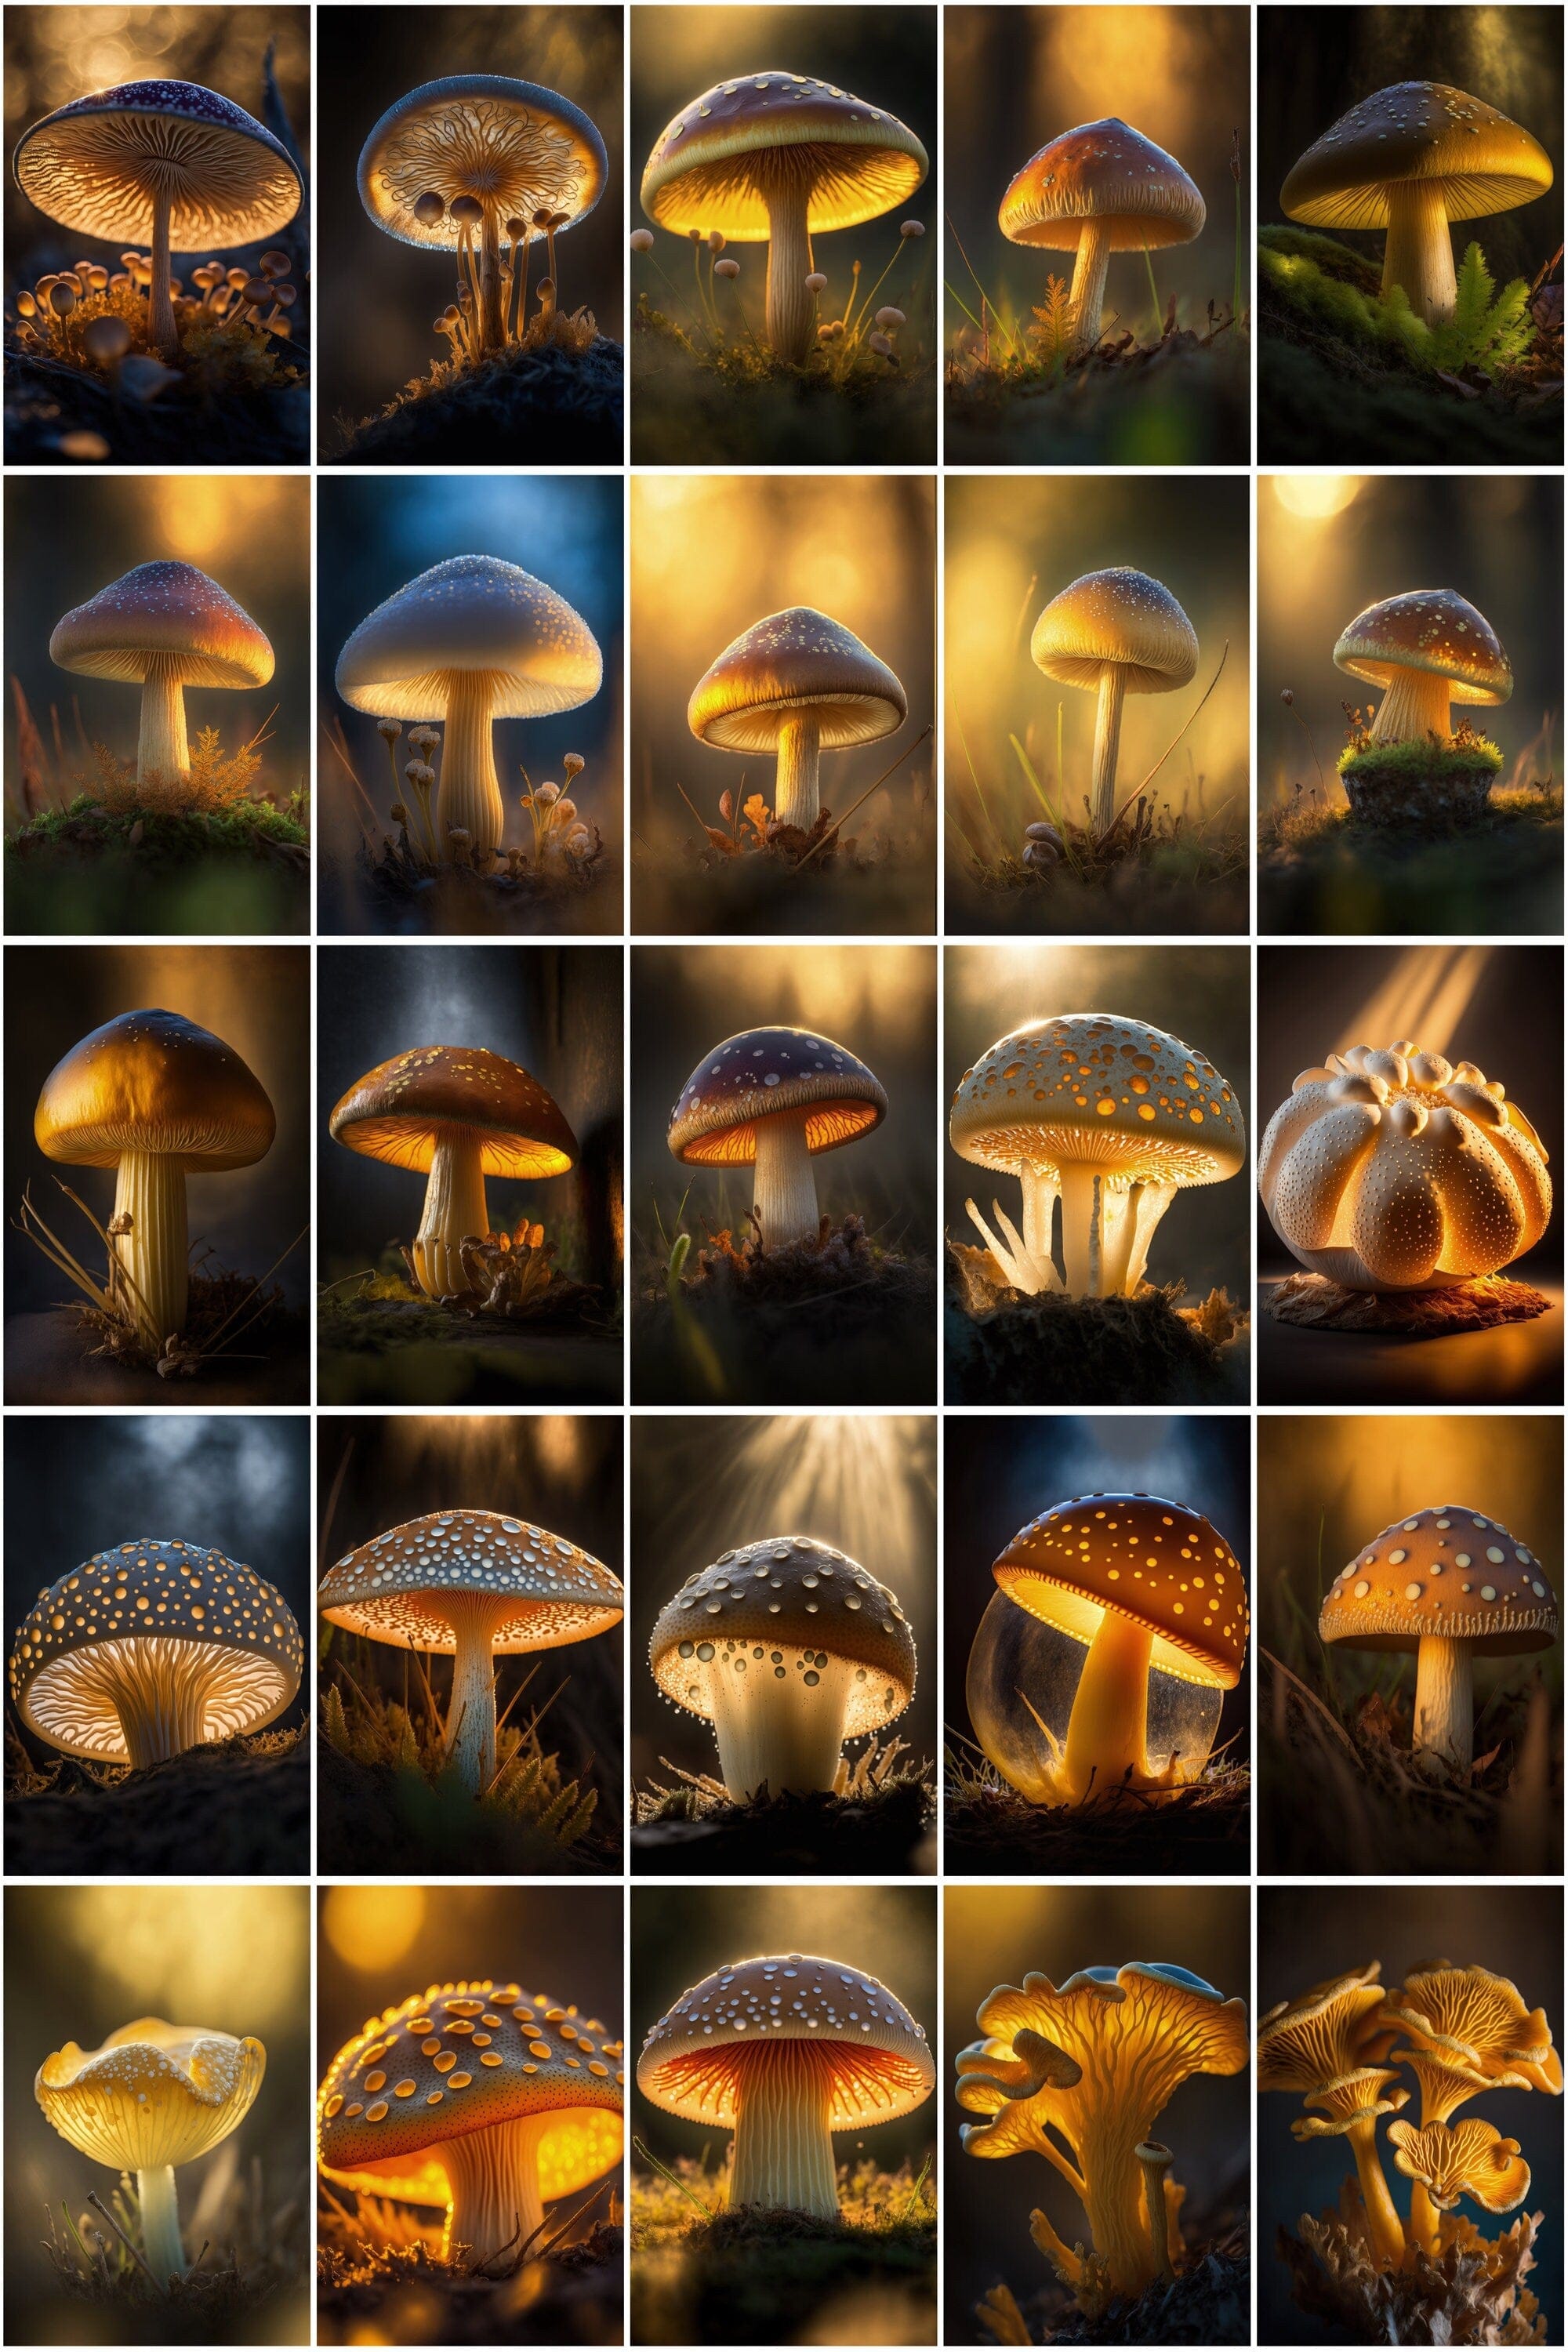 320 High-Quality Images of Mushroom Species - Perfect for Nature Lovers and Researchers! Digital Download Sumobundle